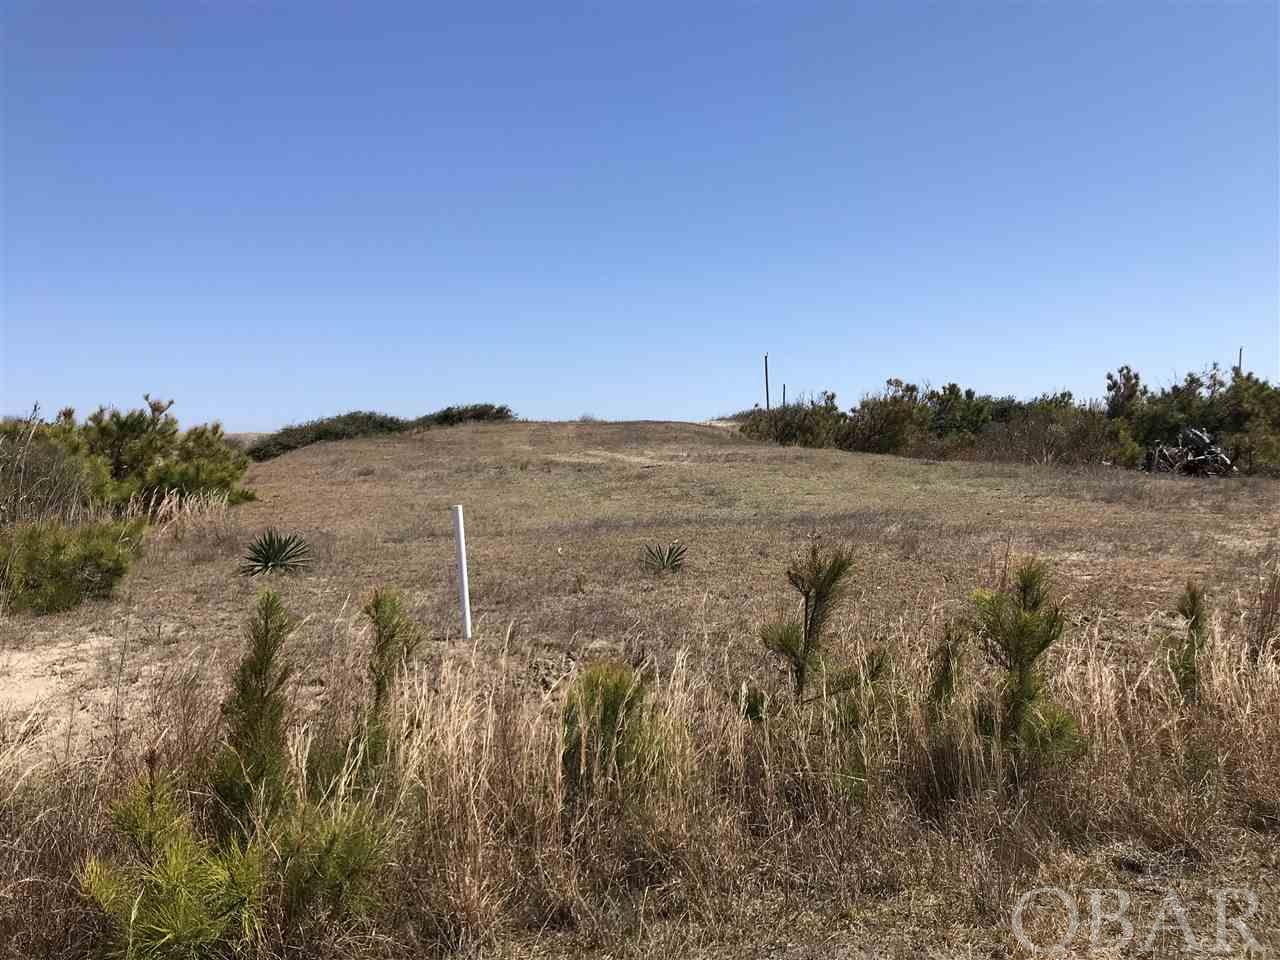 This is your opportunity to own over 2.25 ACRES of semi oceanfront land in the 4x4 area of Carova Beach!  This is the equivalent of almost 7 typical 1/3 acre lots in the 4wd area.  Such a beautiful piece of property that you can build you beach house on and still have plenty of privacy.  The Atlantic Ocean is right across the road for easy beach access and excellent views.  There is an extraordinary amount of sand material on this lot.  You essentially are buying an entire block.  If you are looking for paradise and elbow room, this is your unique opportunity to do it now!